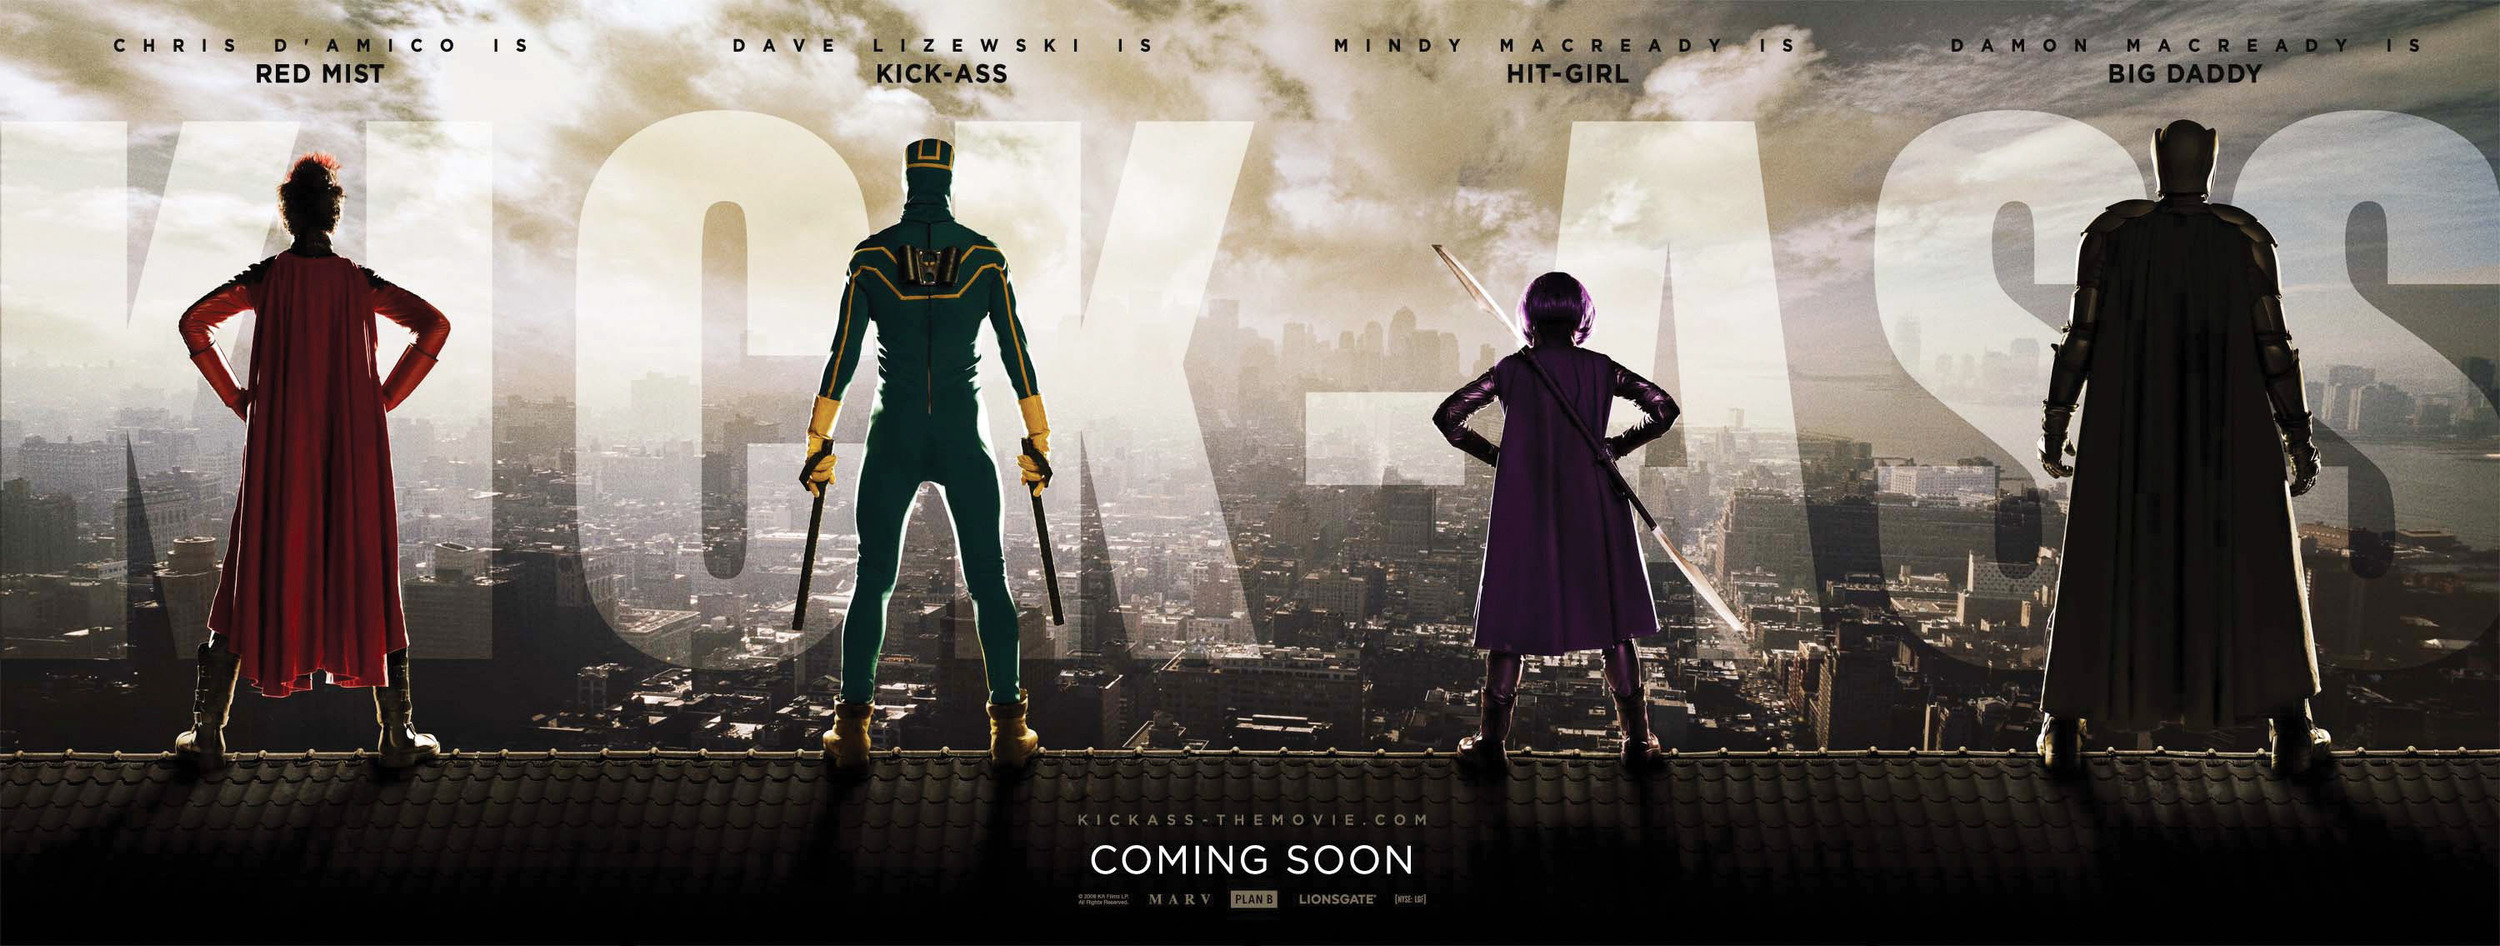 Mega Sized Movie Poster Image for Kick-Ass (#35 of 35)